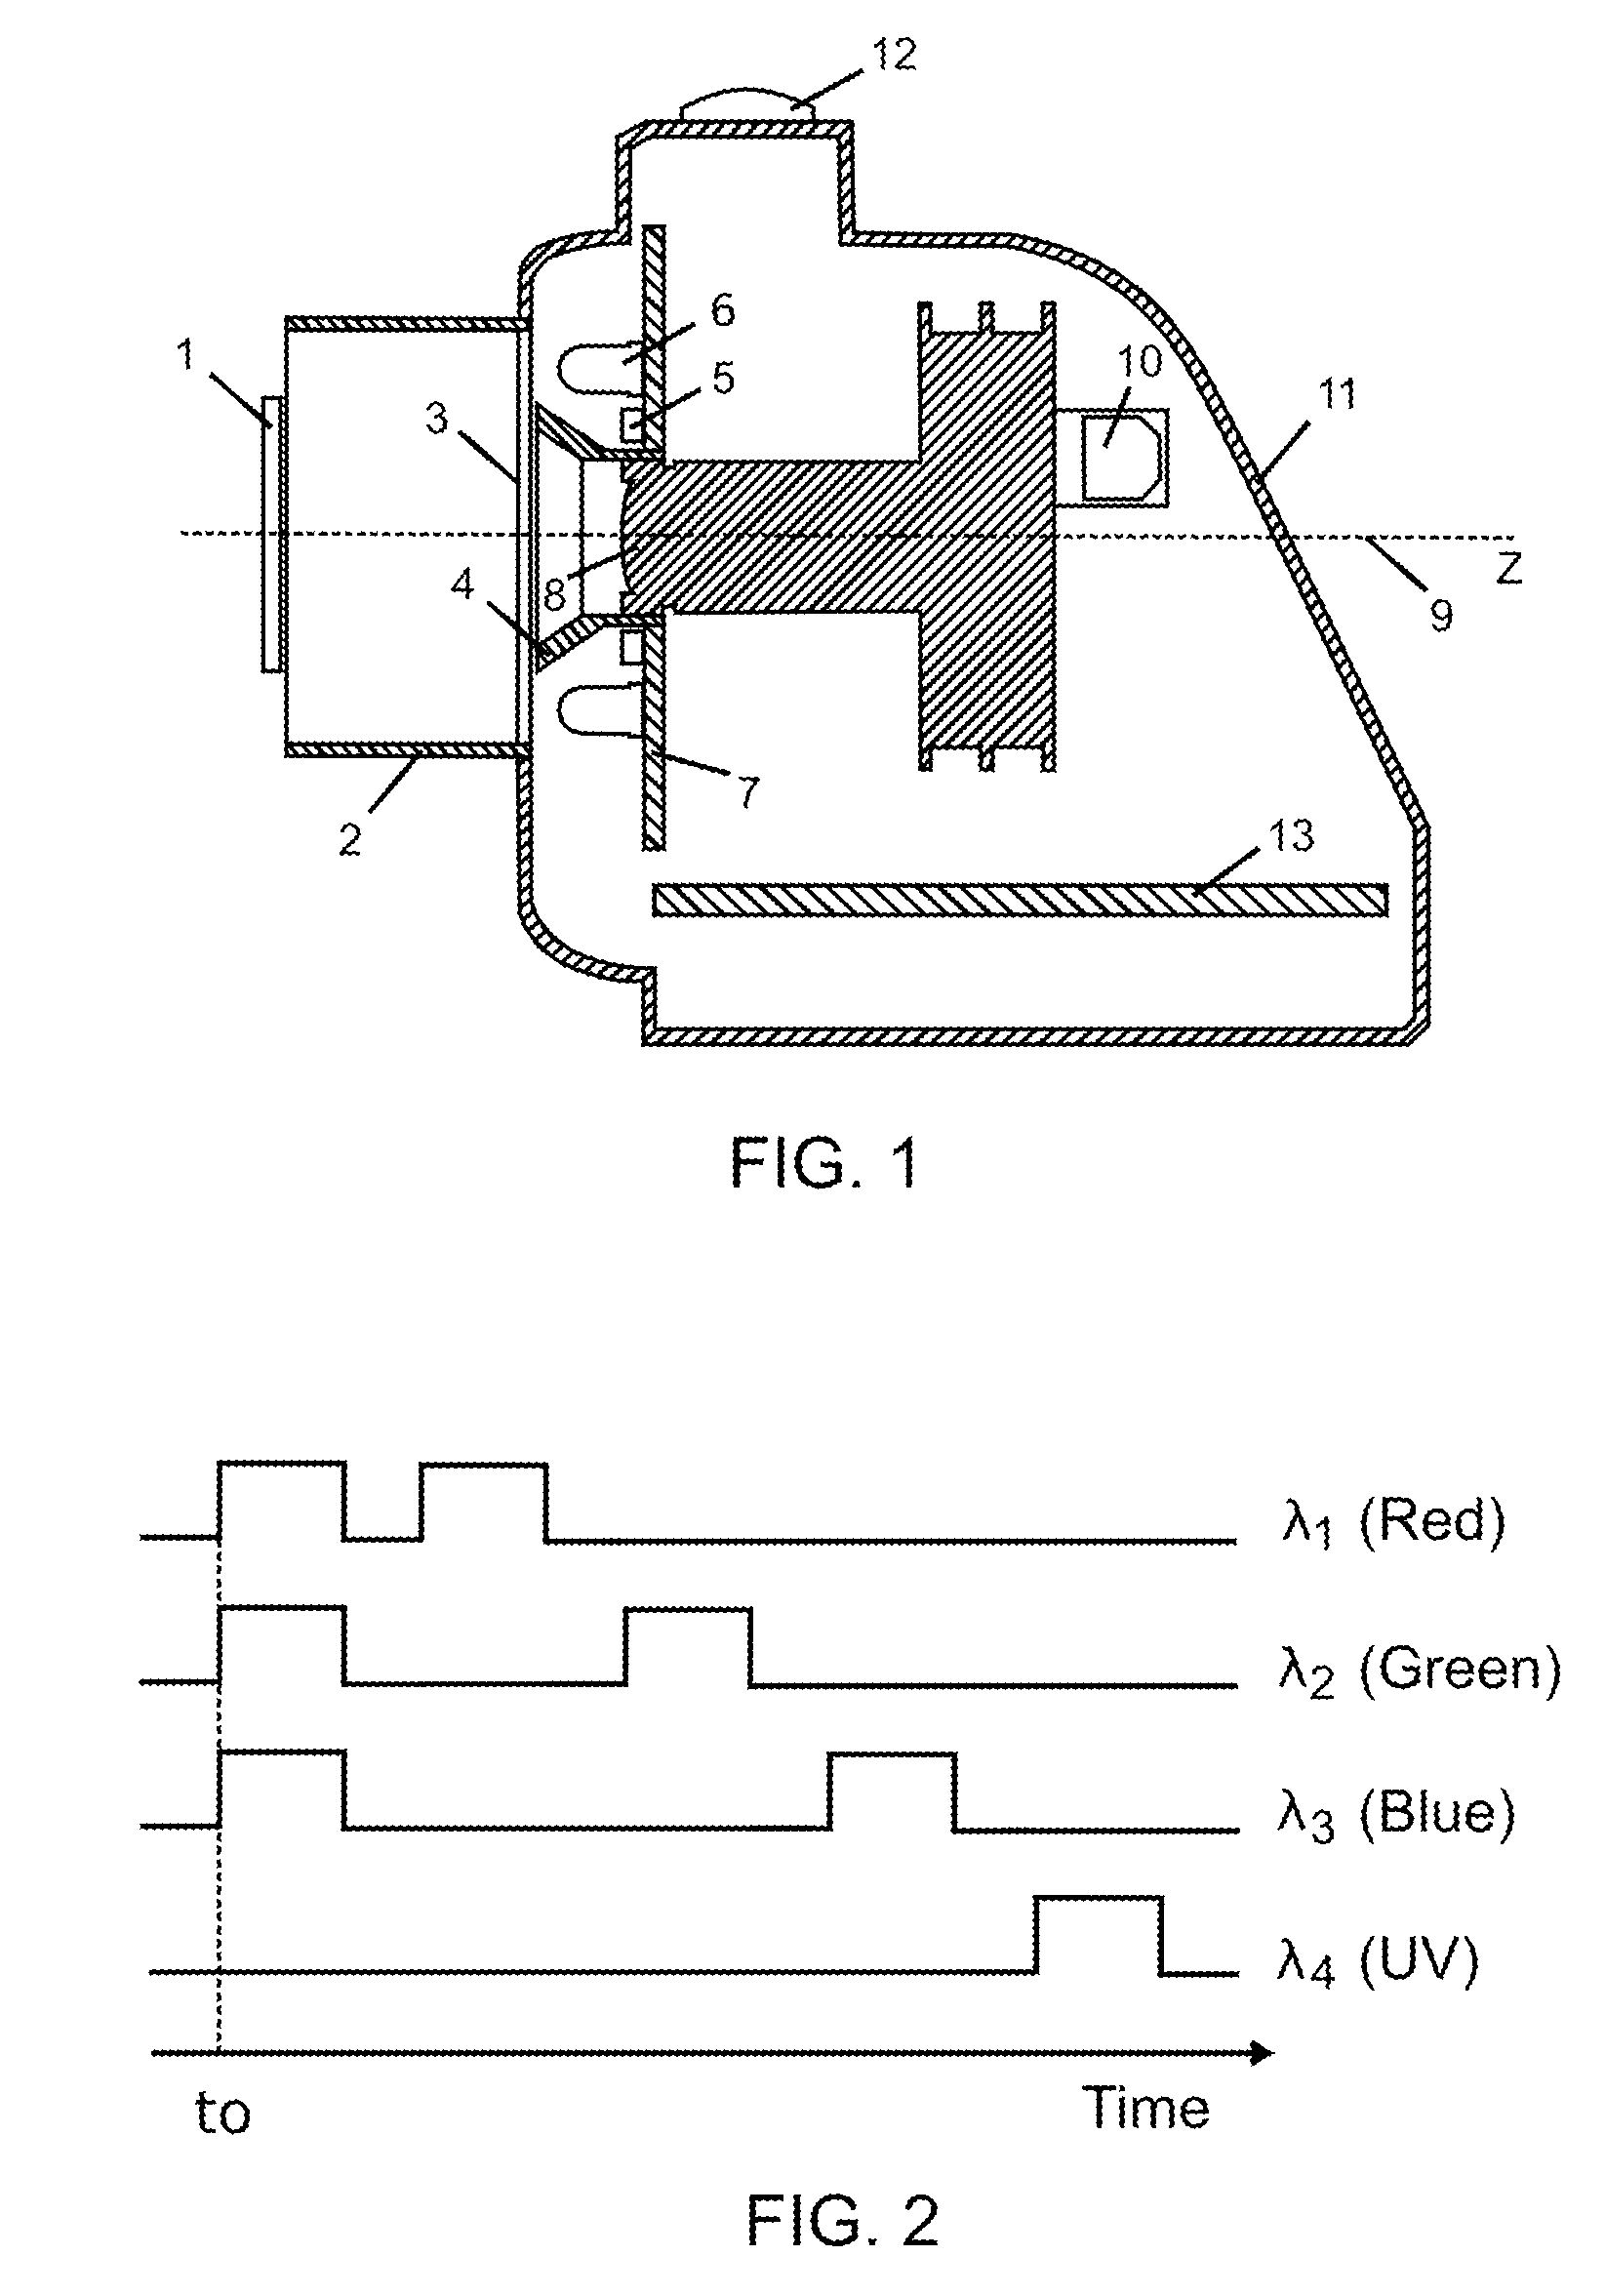 Method and device for quantitatively determining the surface optical characteristics of a reference object comprised by a plurality of optically differentiable layers